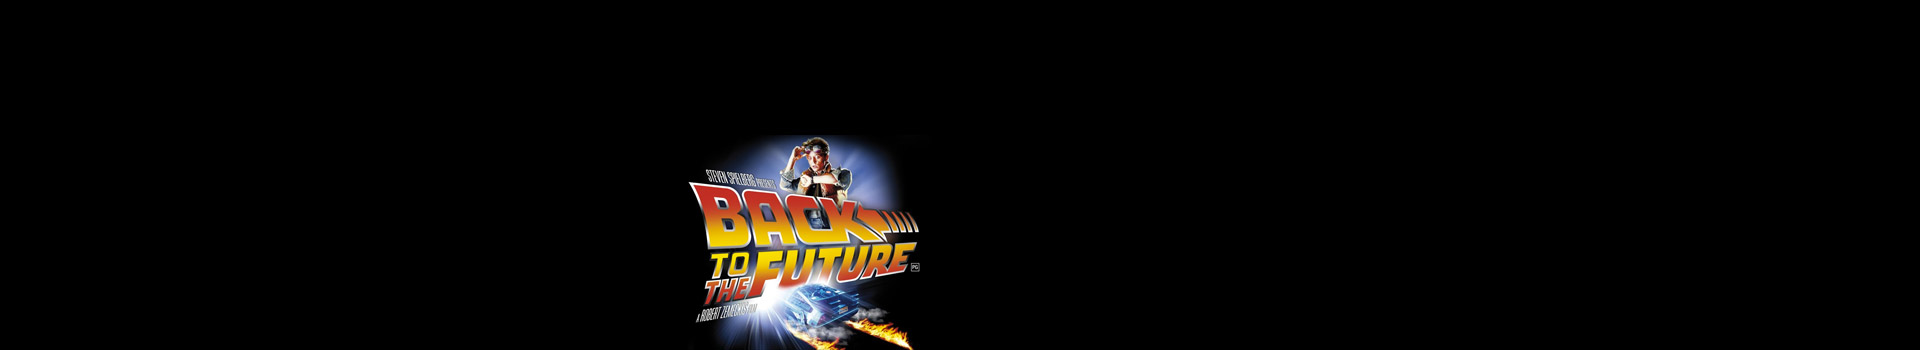 Back To The Future Live In Concert tickets at the Royal Albert Hall